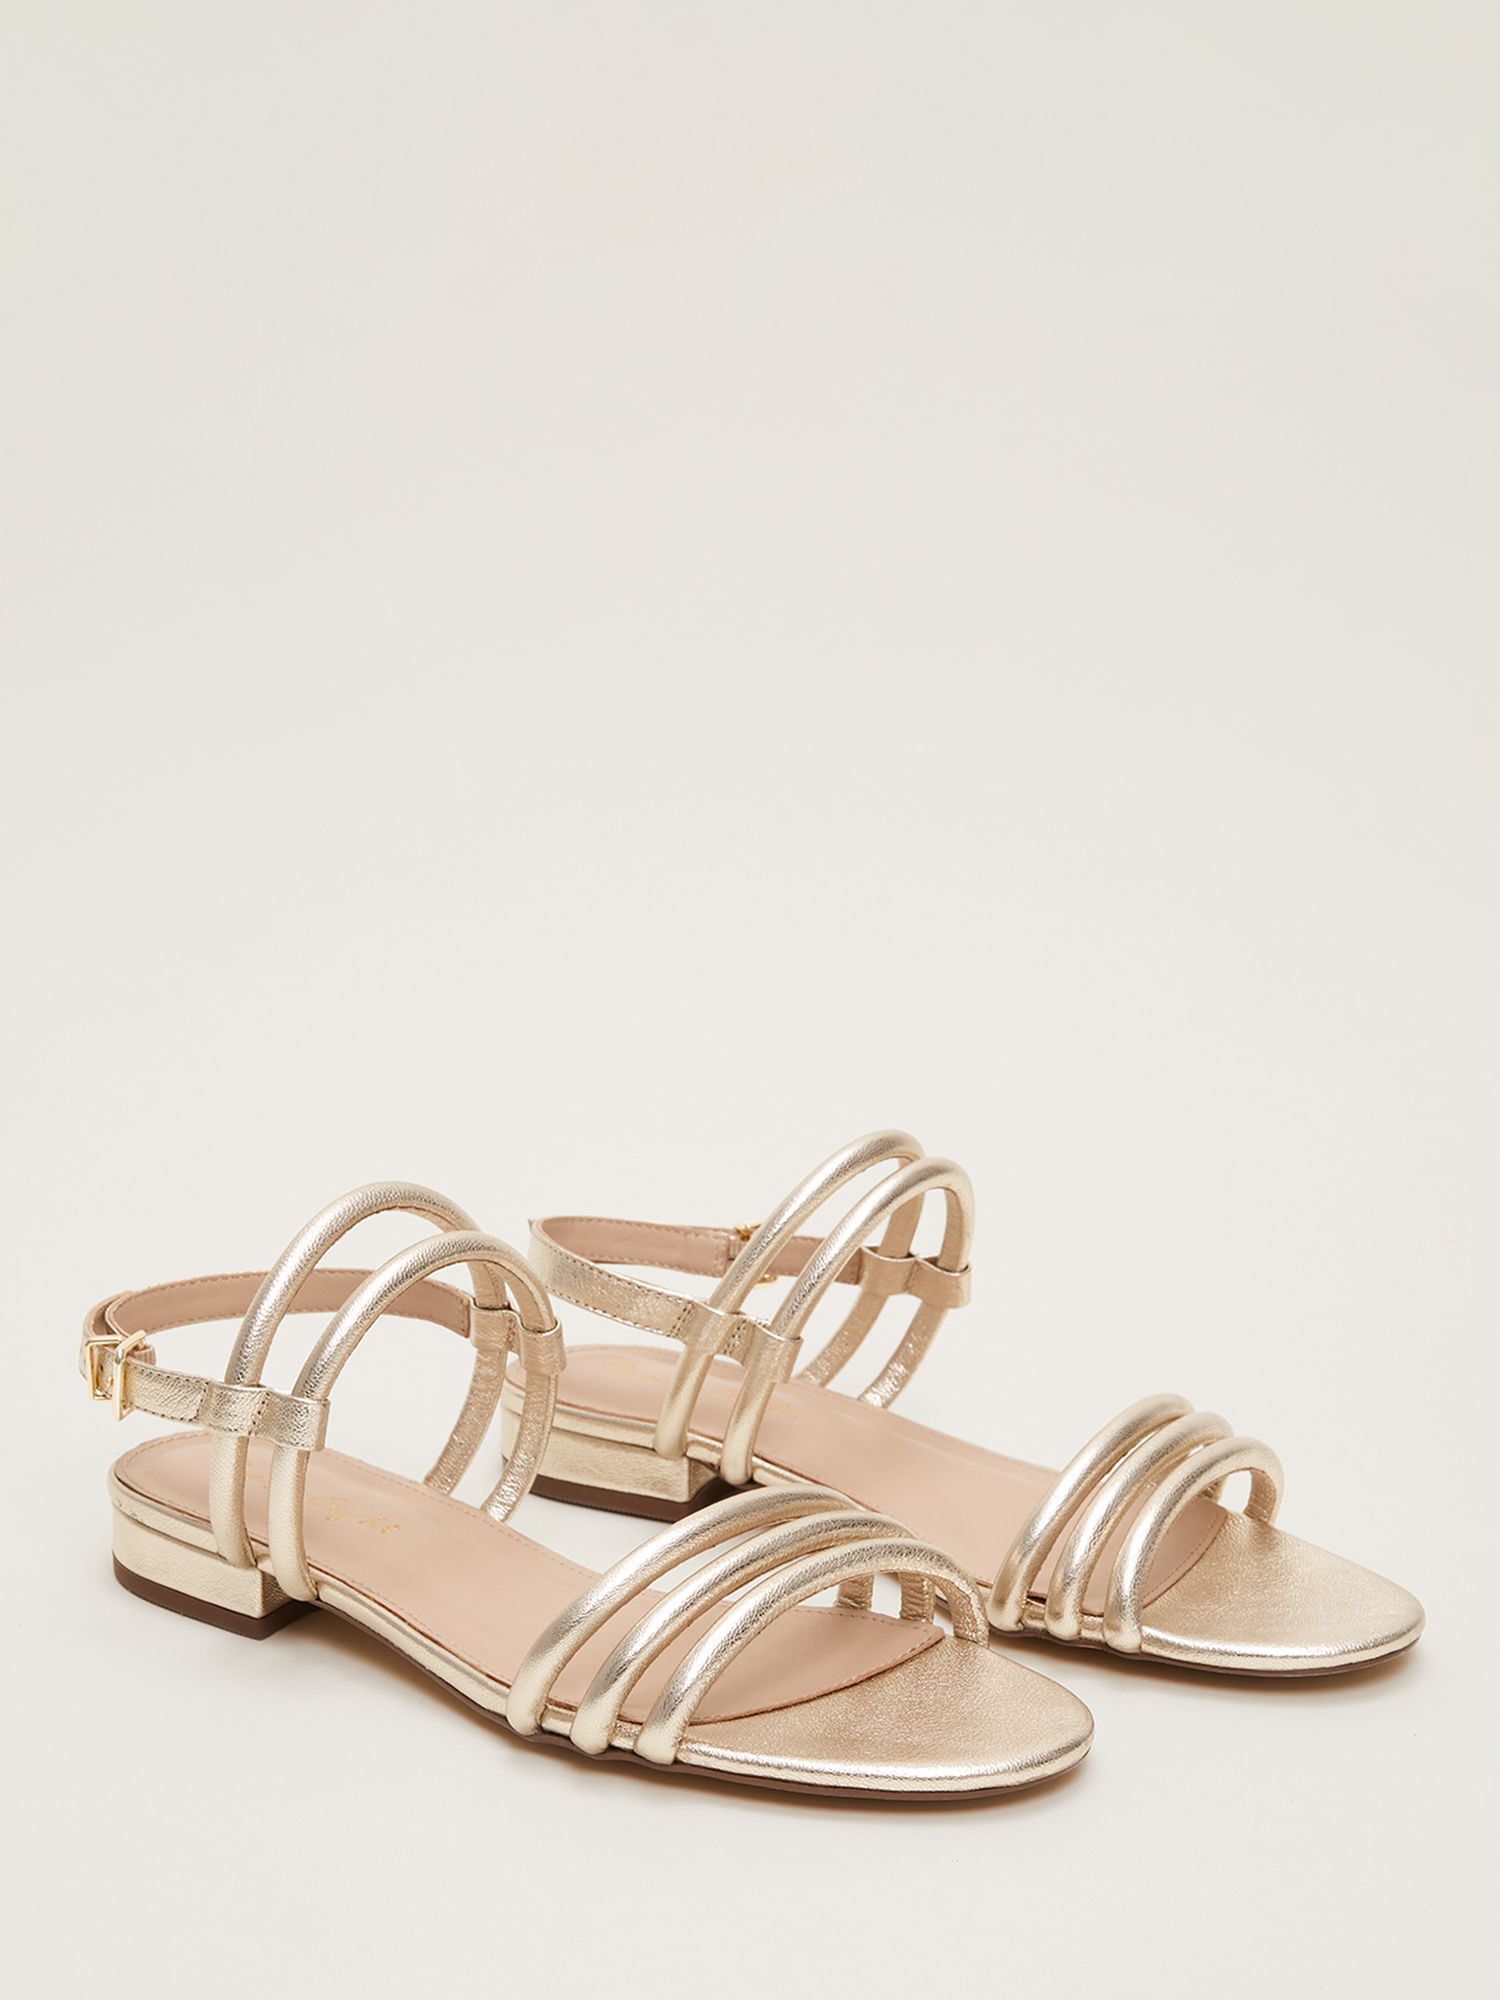 Phase Eight Metallic Leather Sandals, Gold at John Lewis & Partners